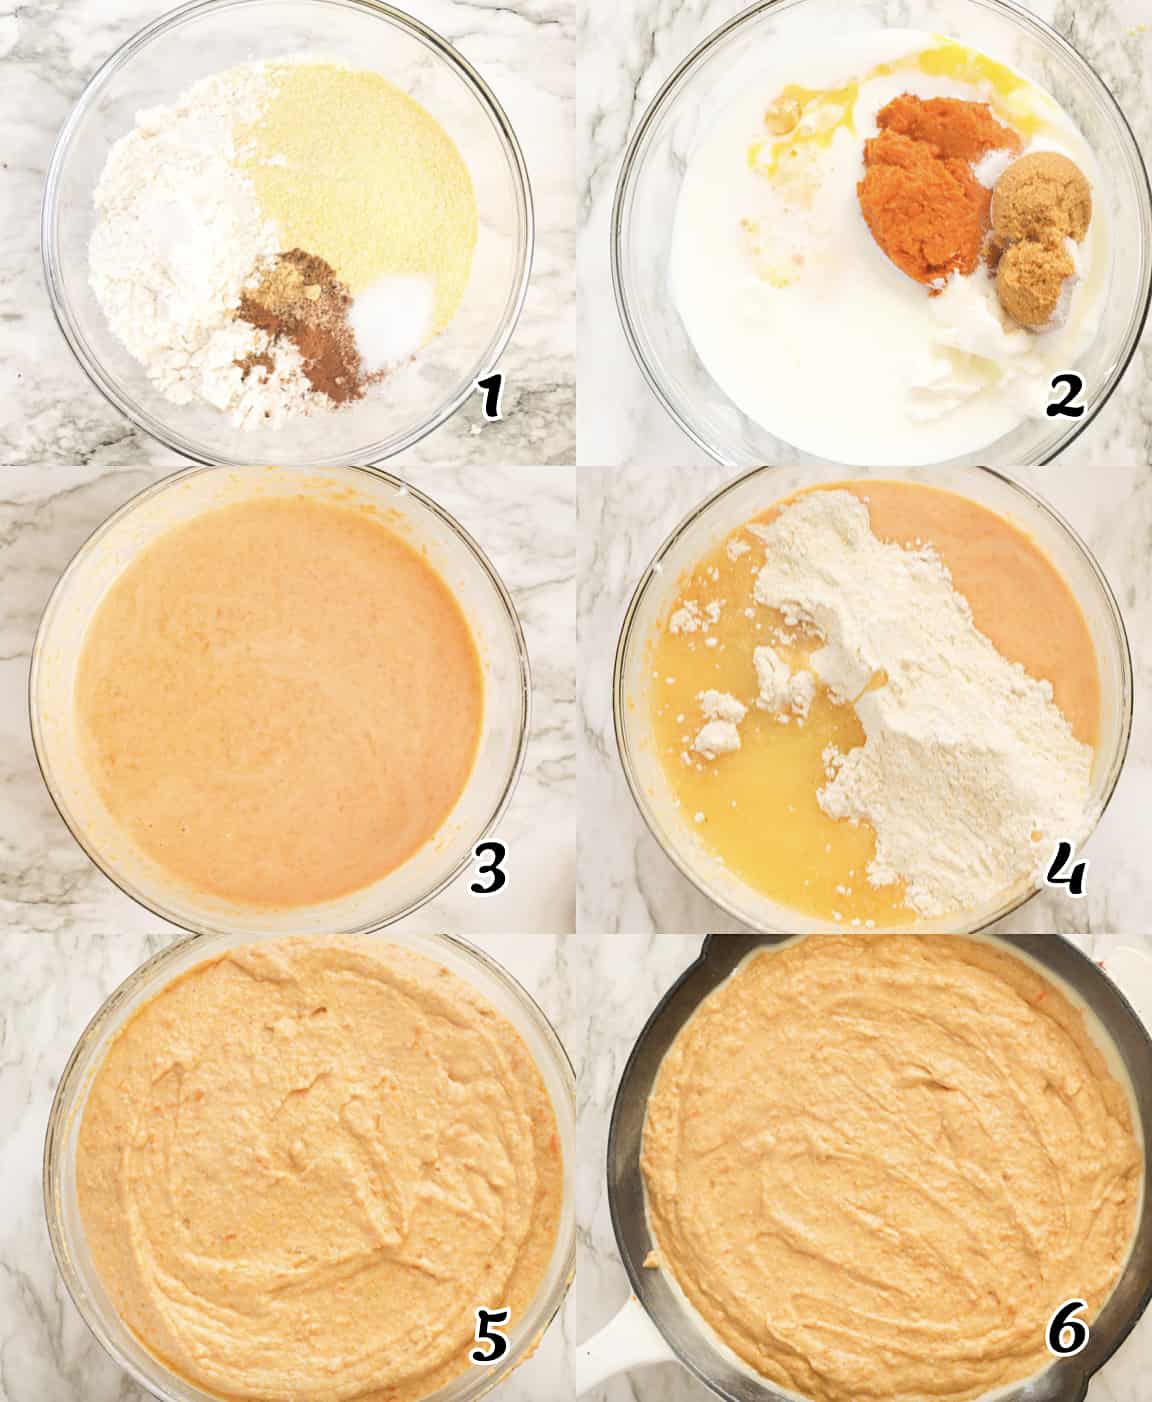 Mix dry ingredients, add wet ingredients, mix and bake